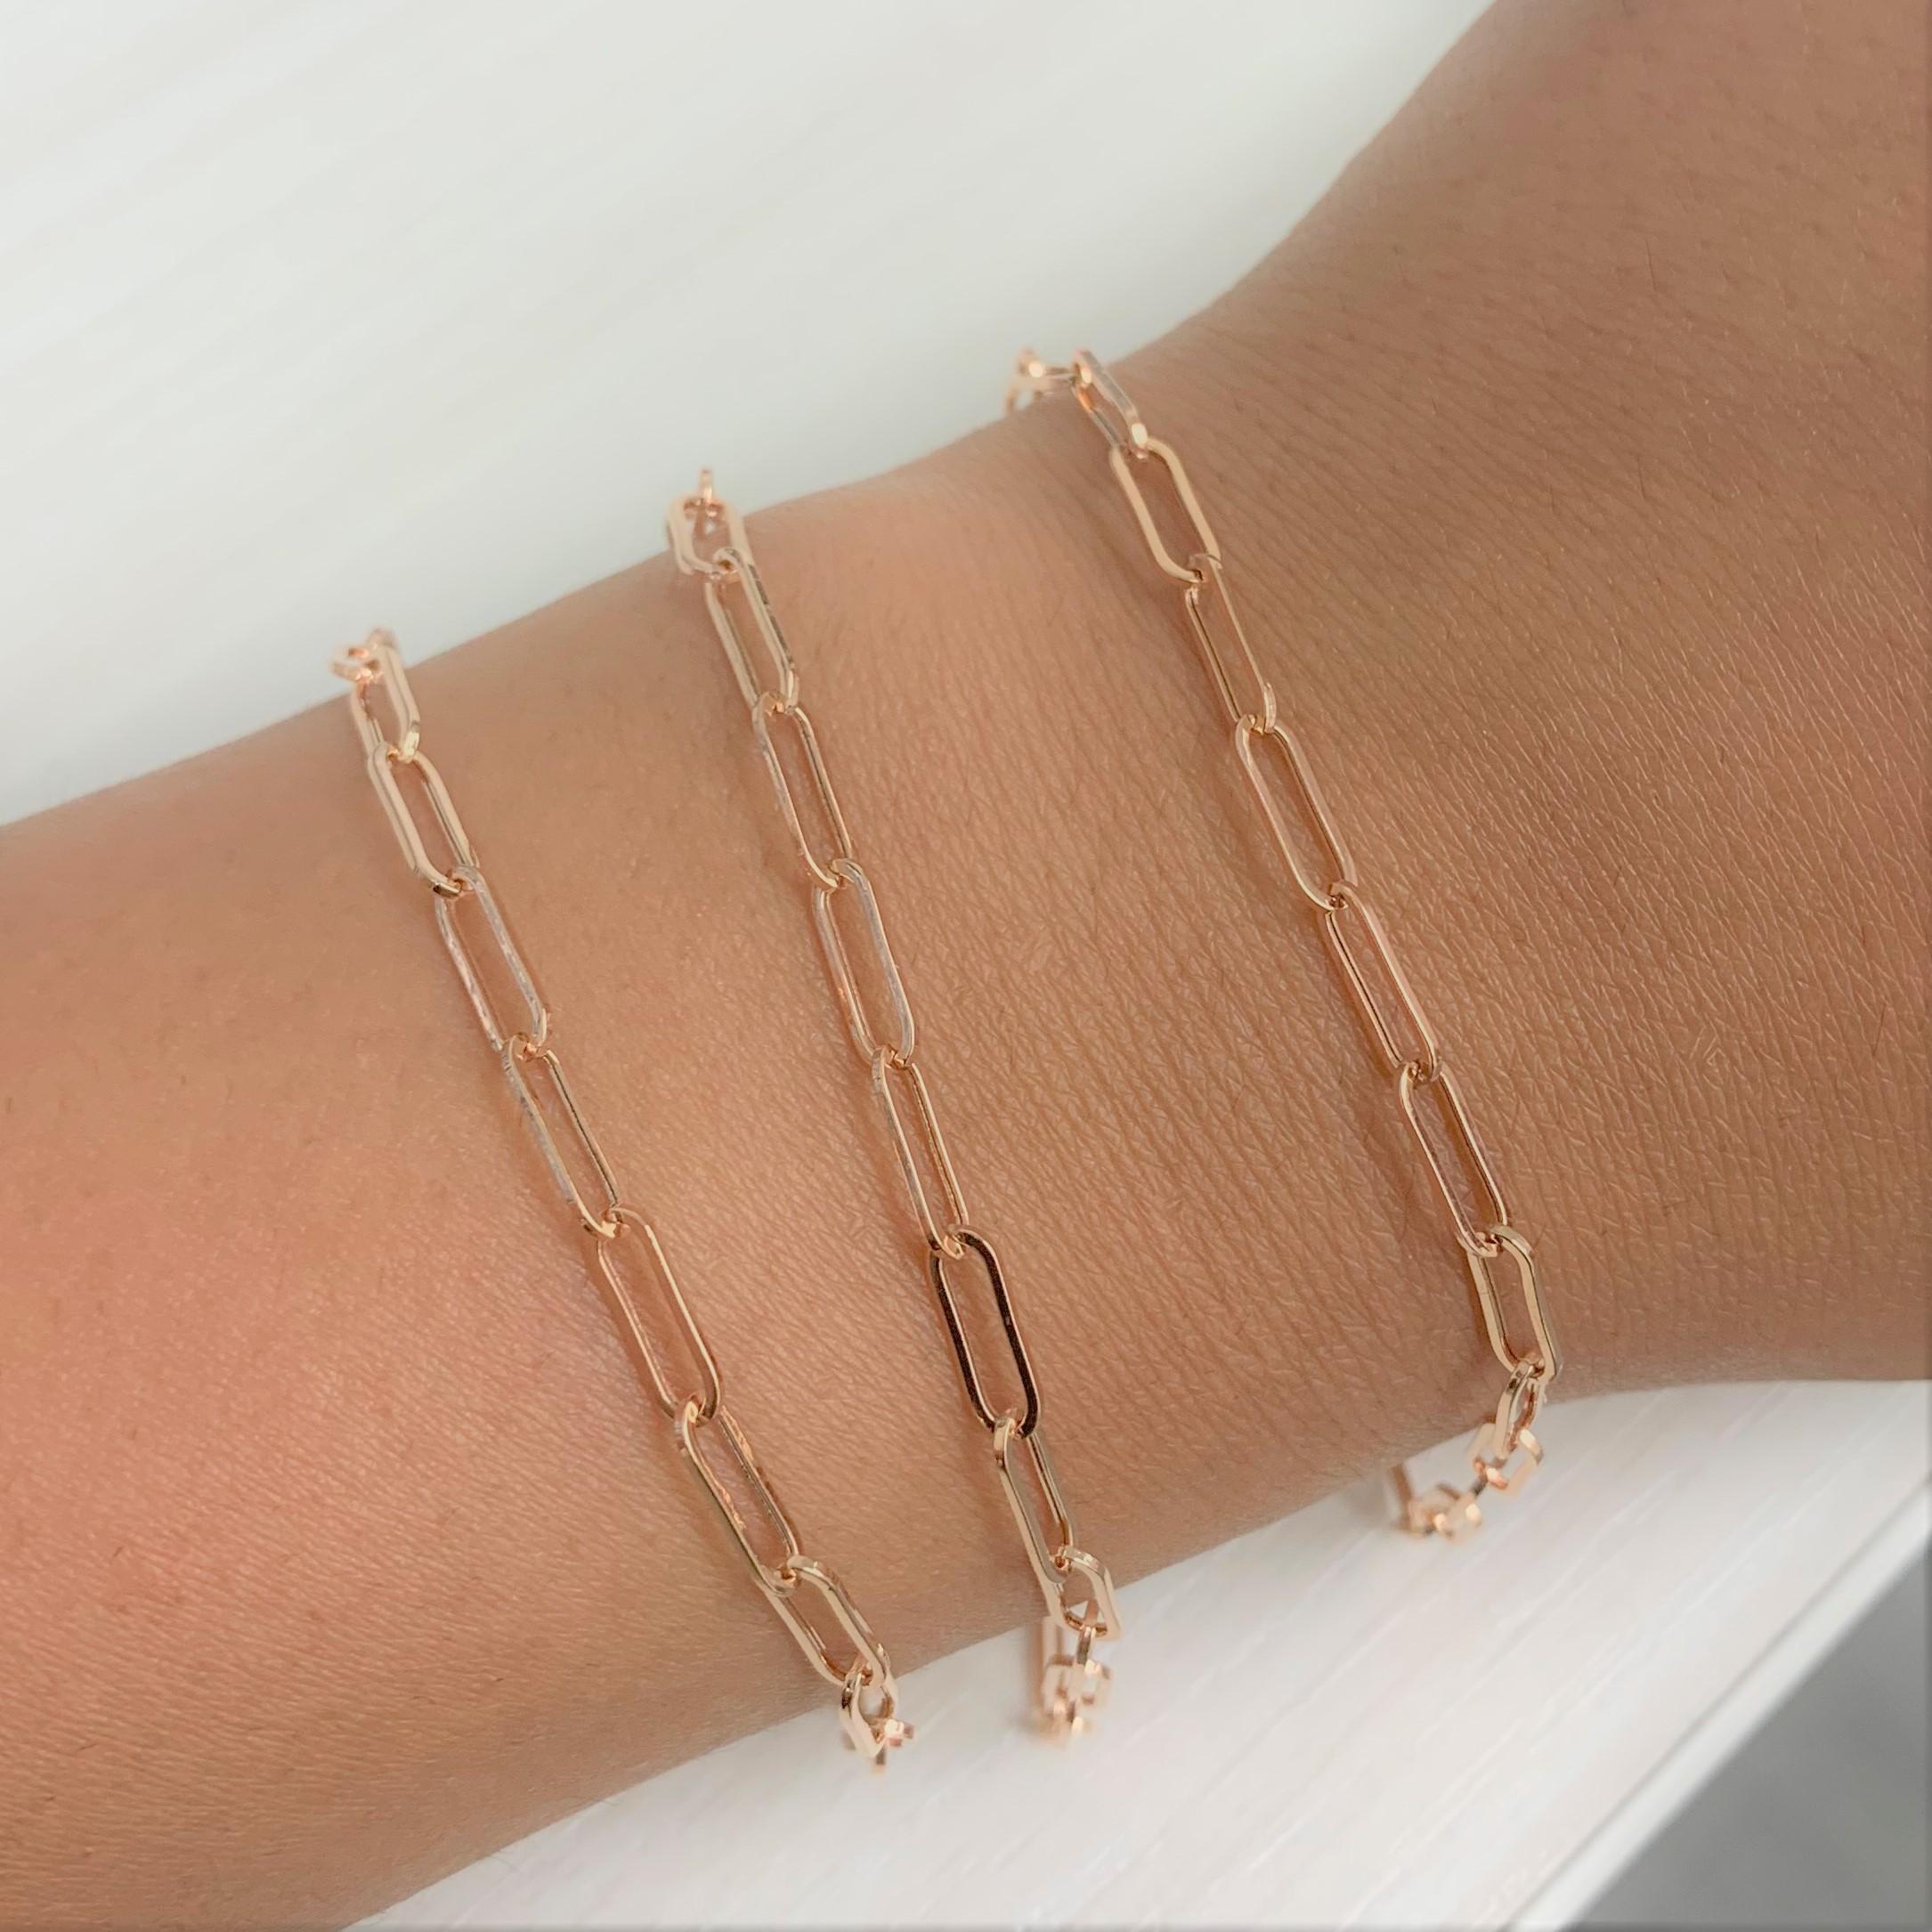 EFFORTLESSLY CHIC - Wrap your wrist in this dainty 14k Yellow Or Rose Gold Paperclip  link bracelet. Crafted in Italy, the paperclip look creates an organic design with brilliant shine. This chain bracelet opens up making it simple to close lobster